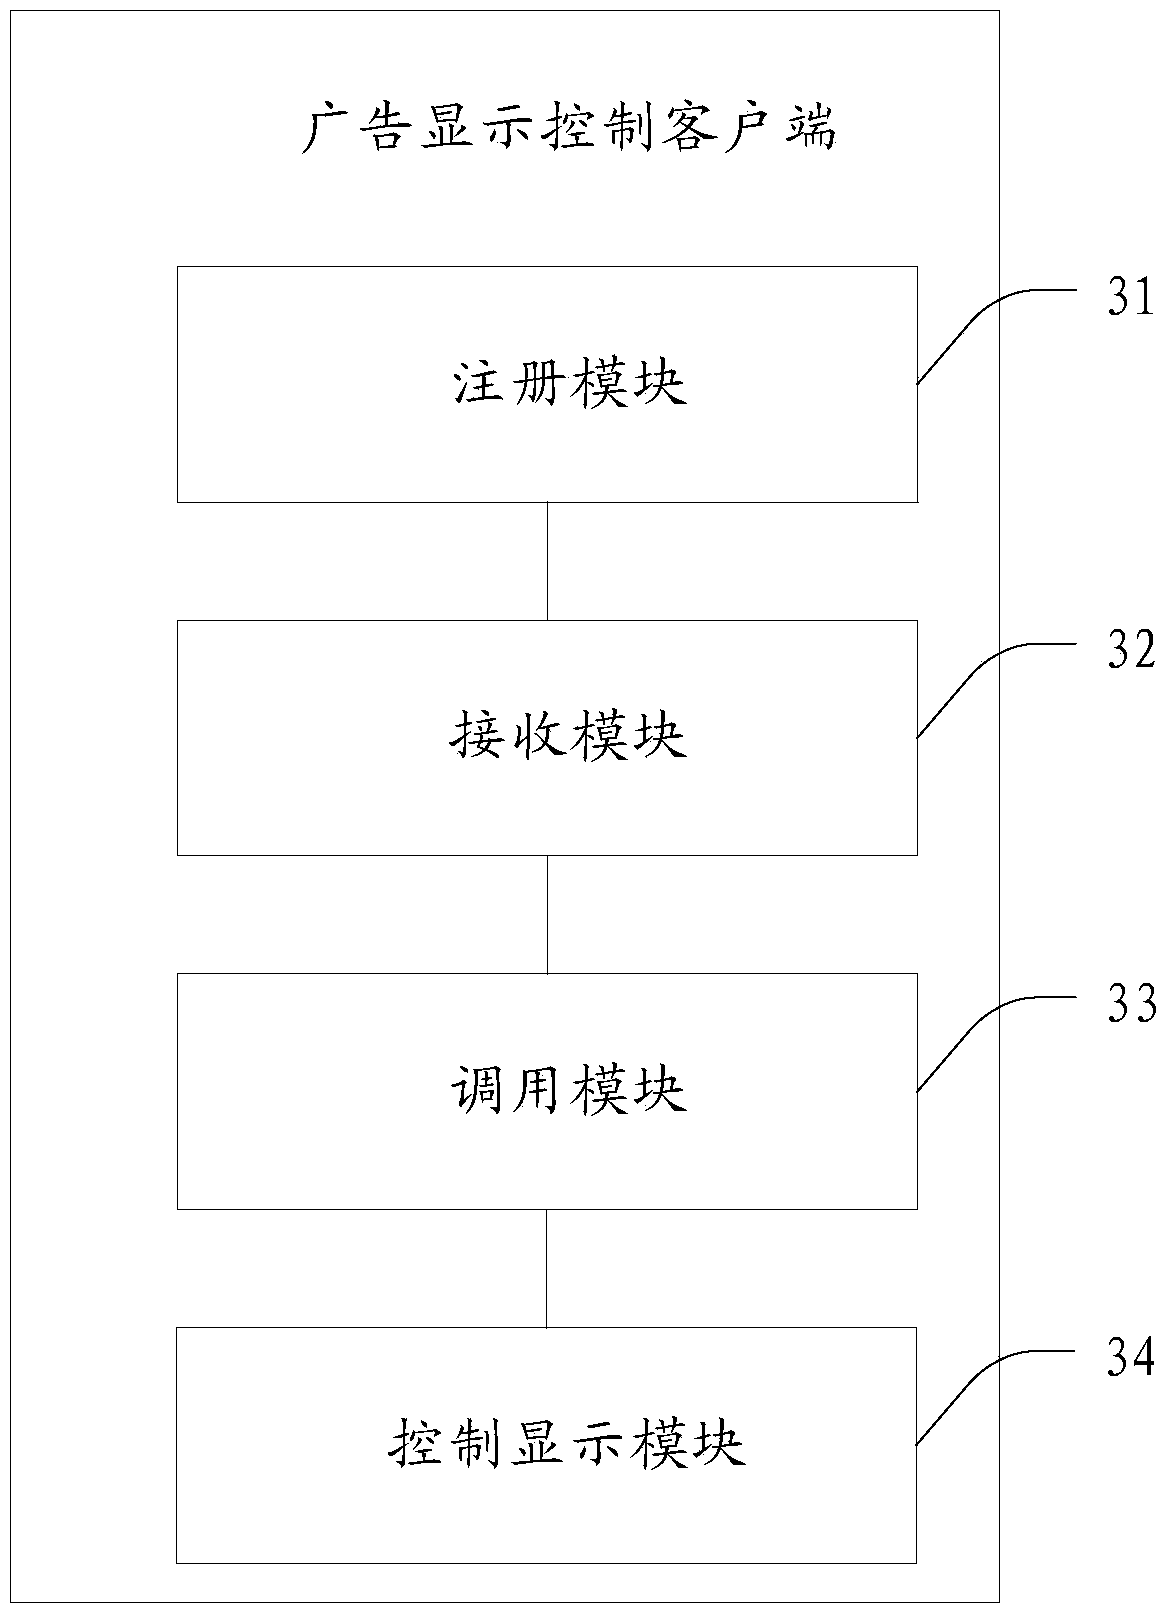 Advertising display control method and apparatus